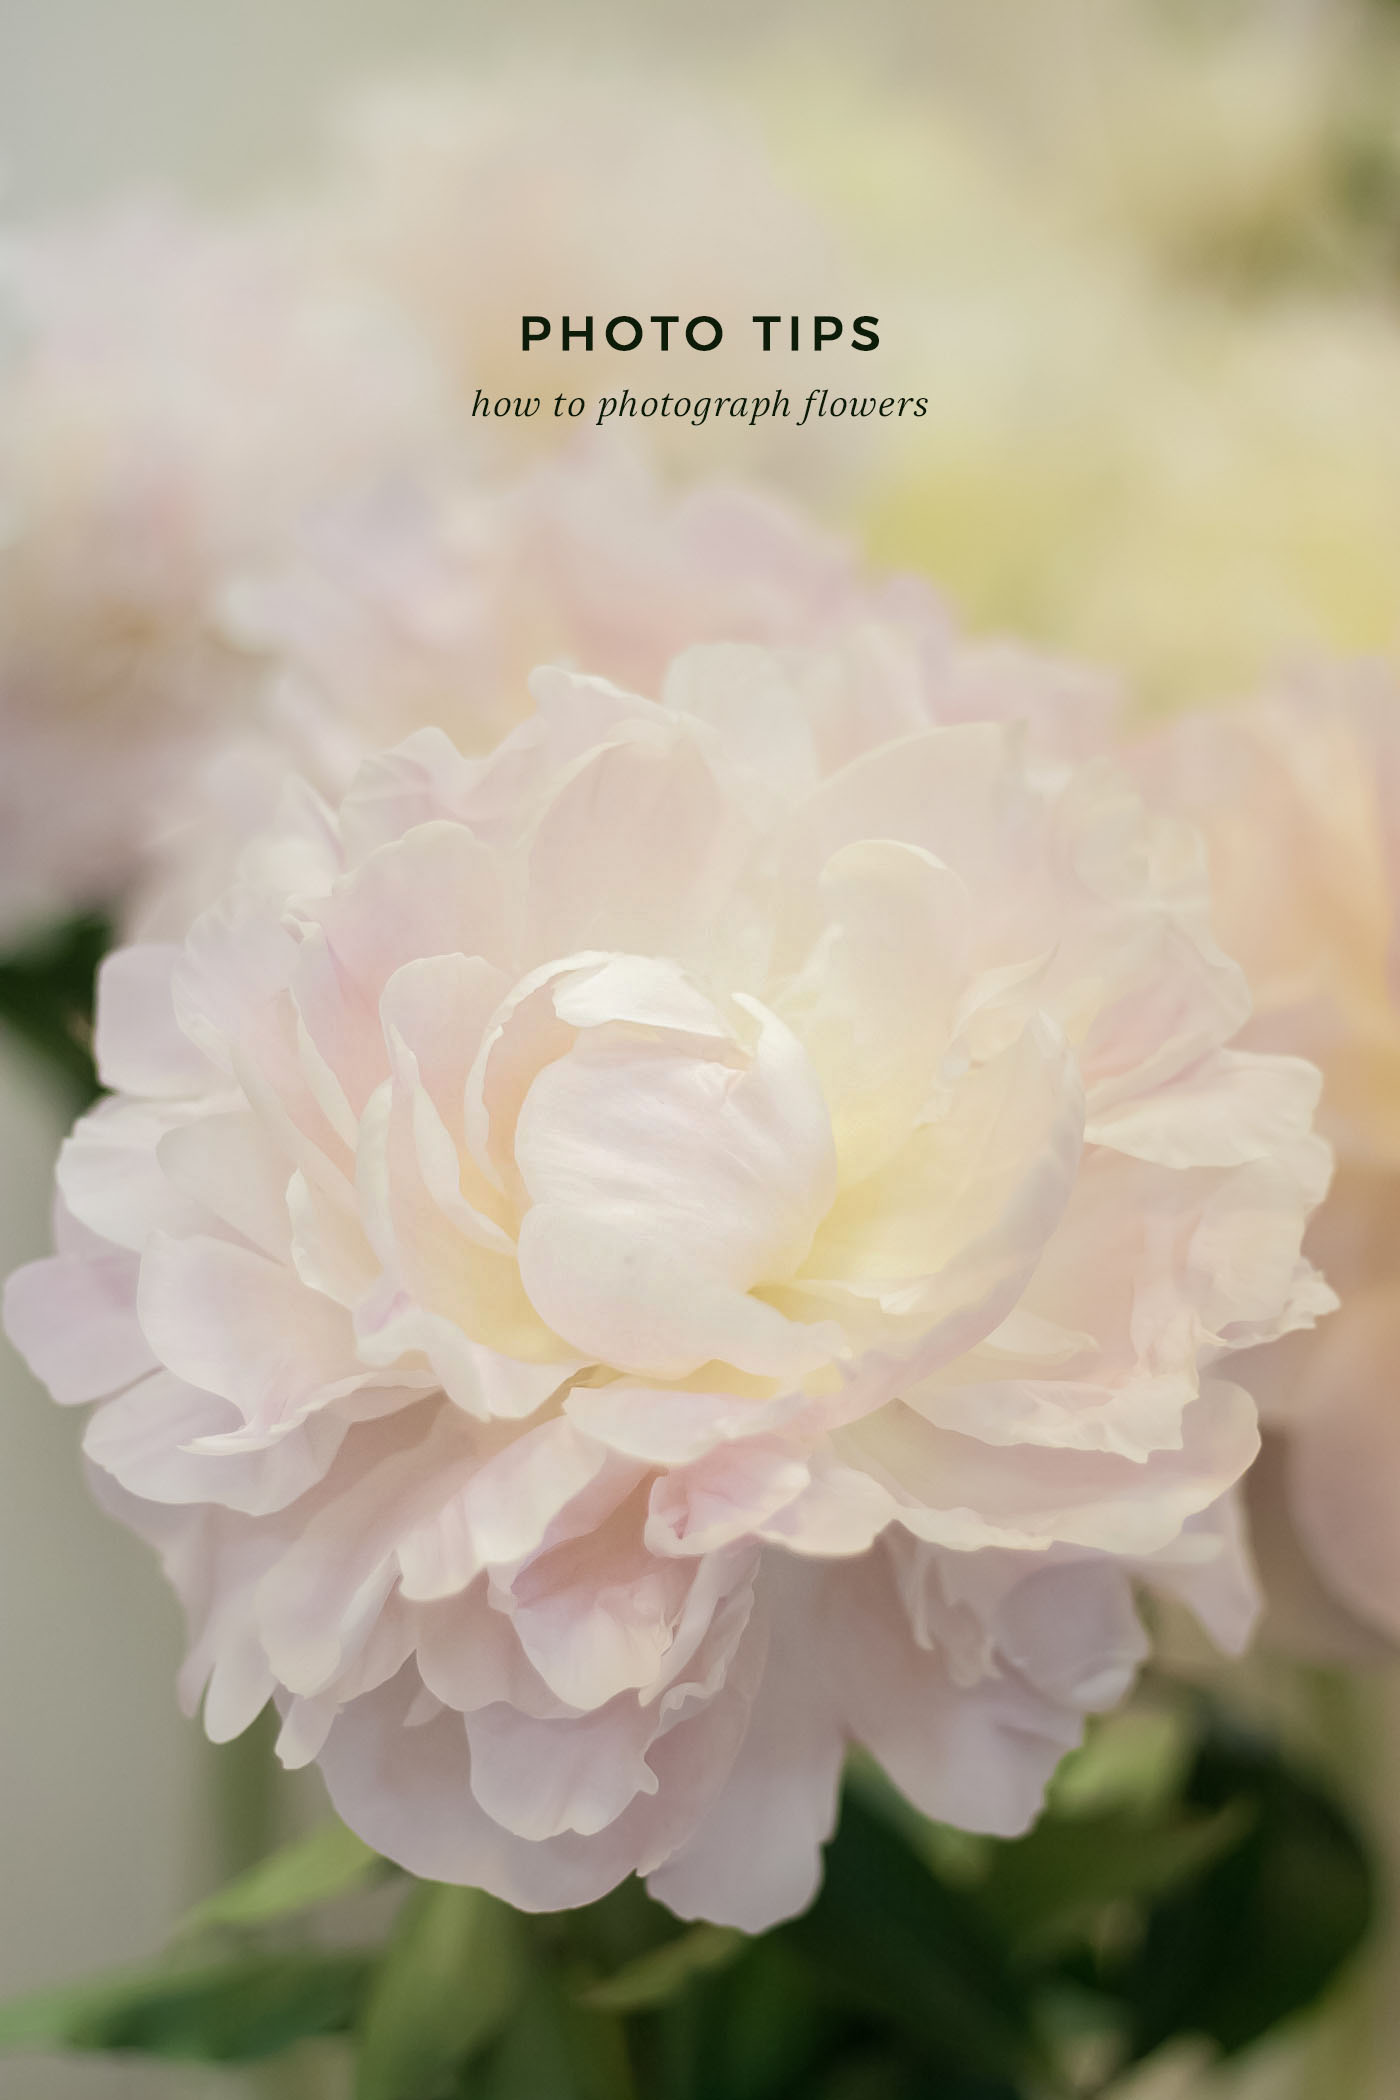 5 Tips to Photograph Flowers